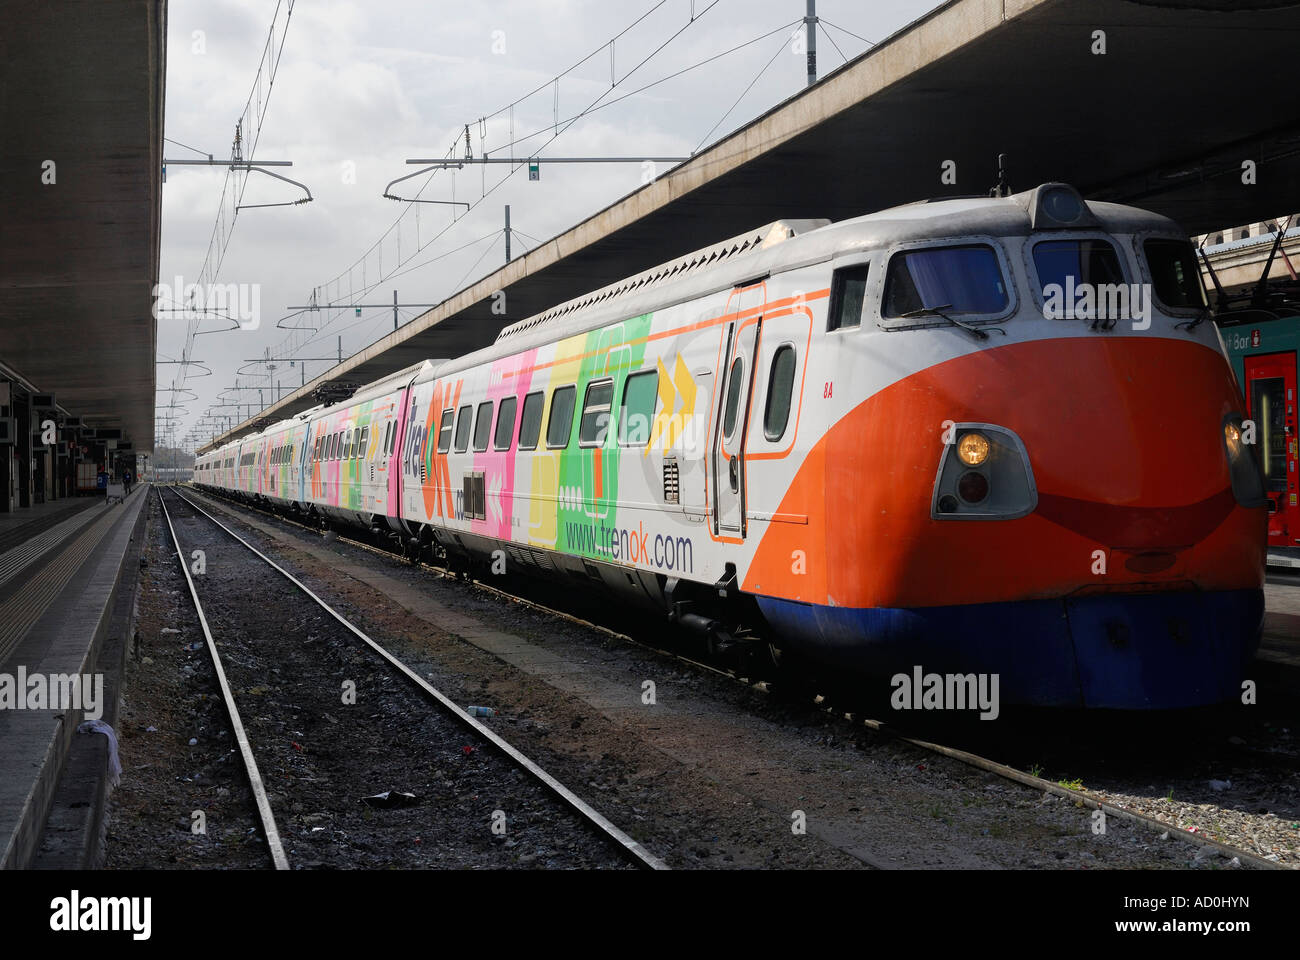 Colorful commuter electric train in Termini Station Rome Italy Stock Photo